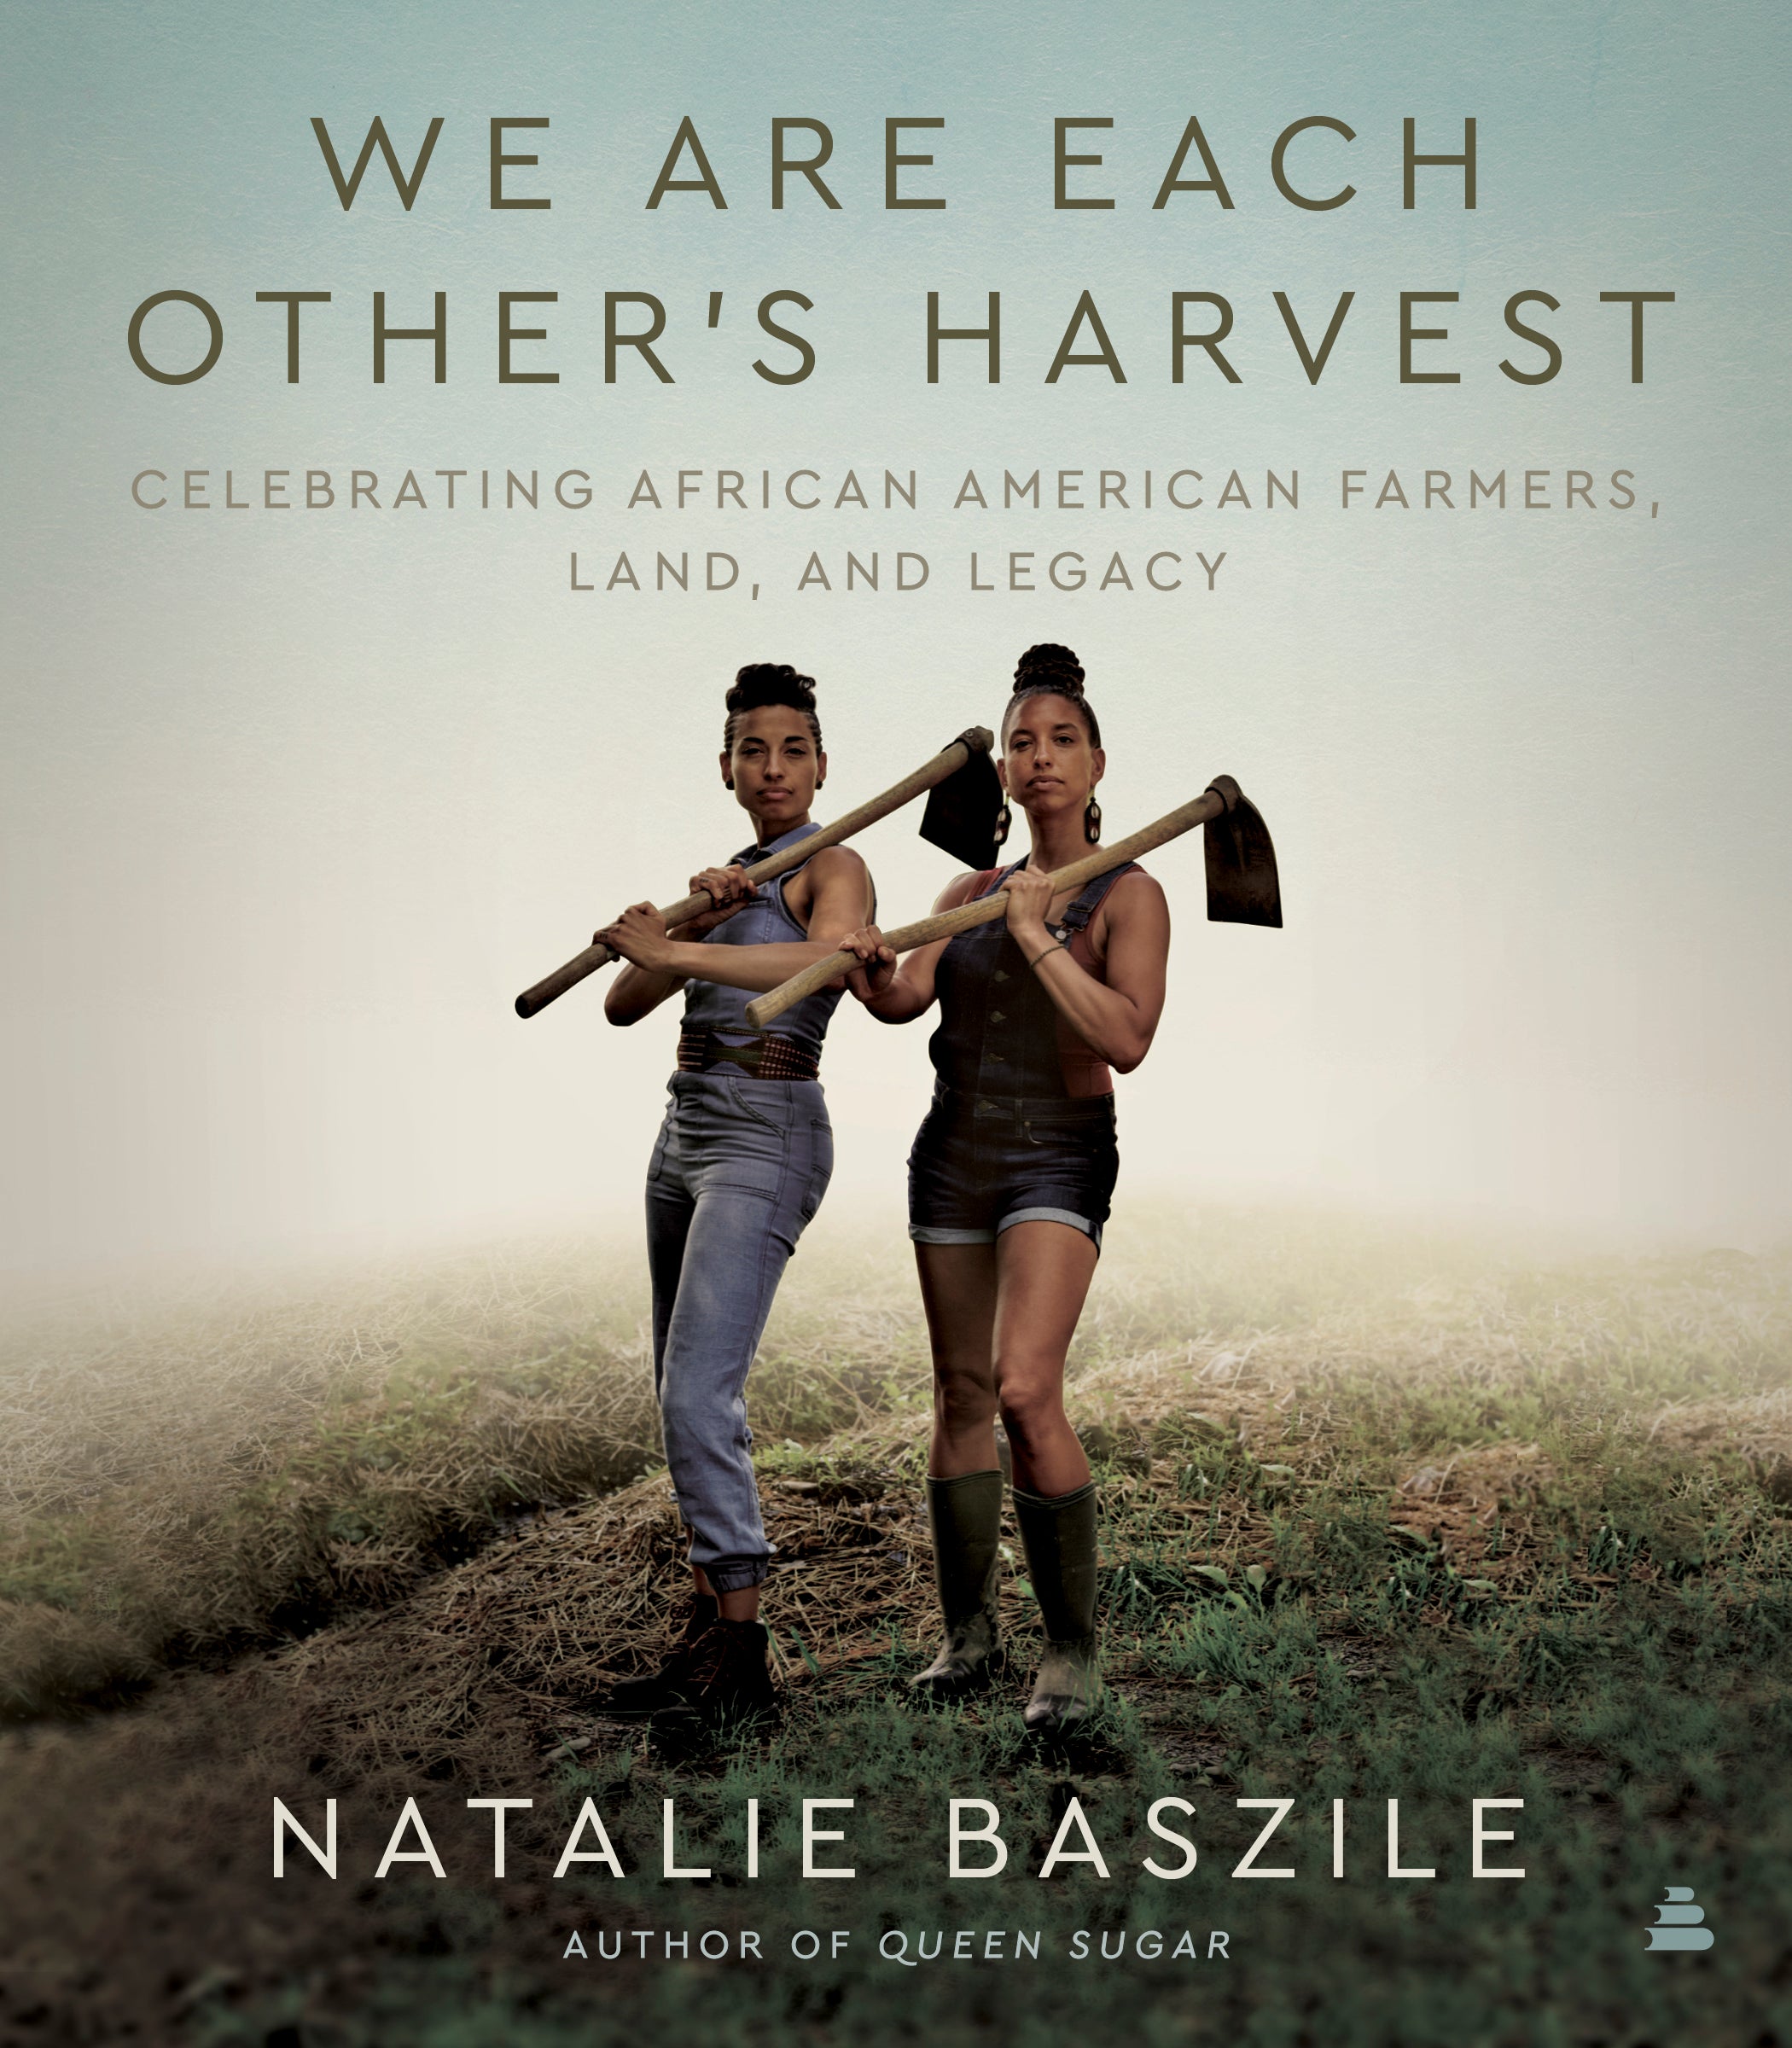 Book Review - We Are Each Other's Harvest